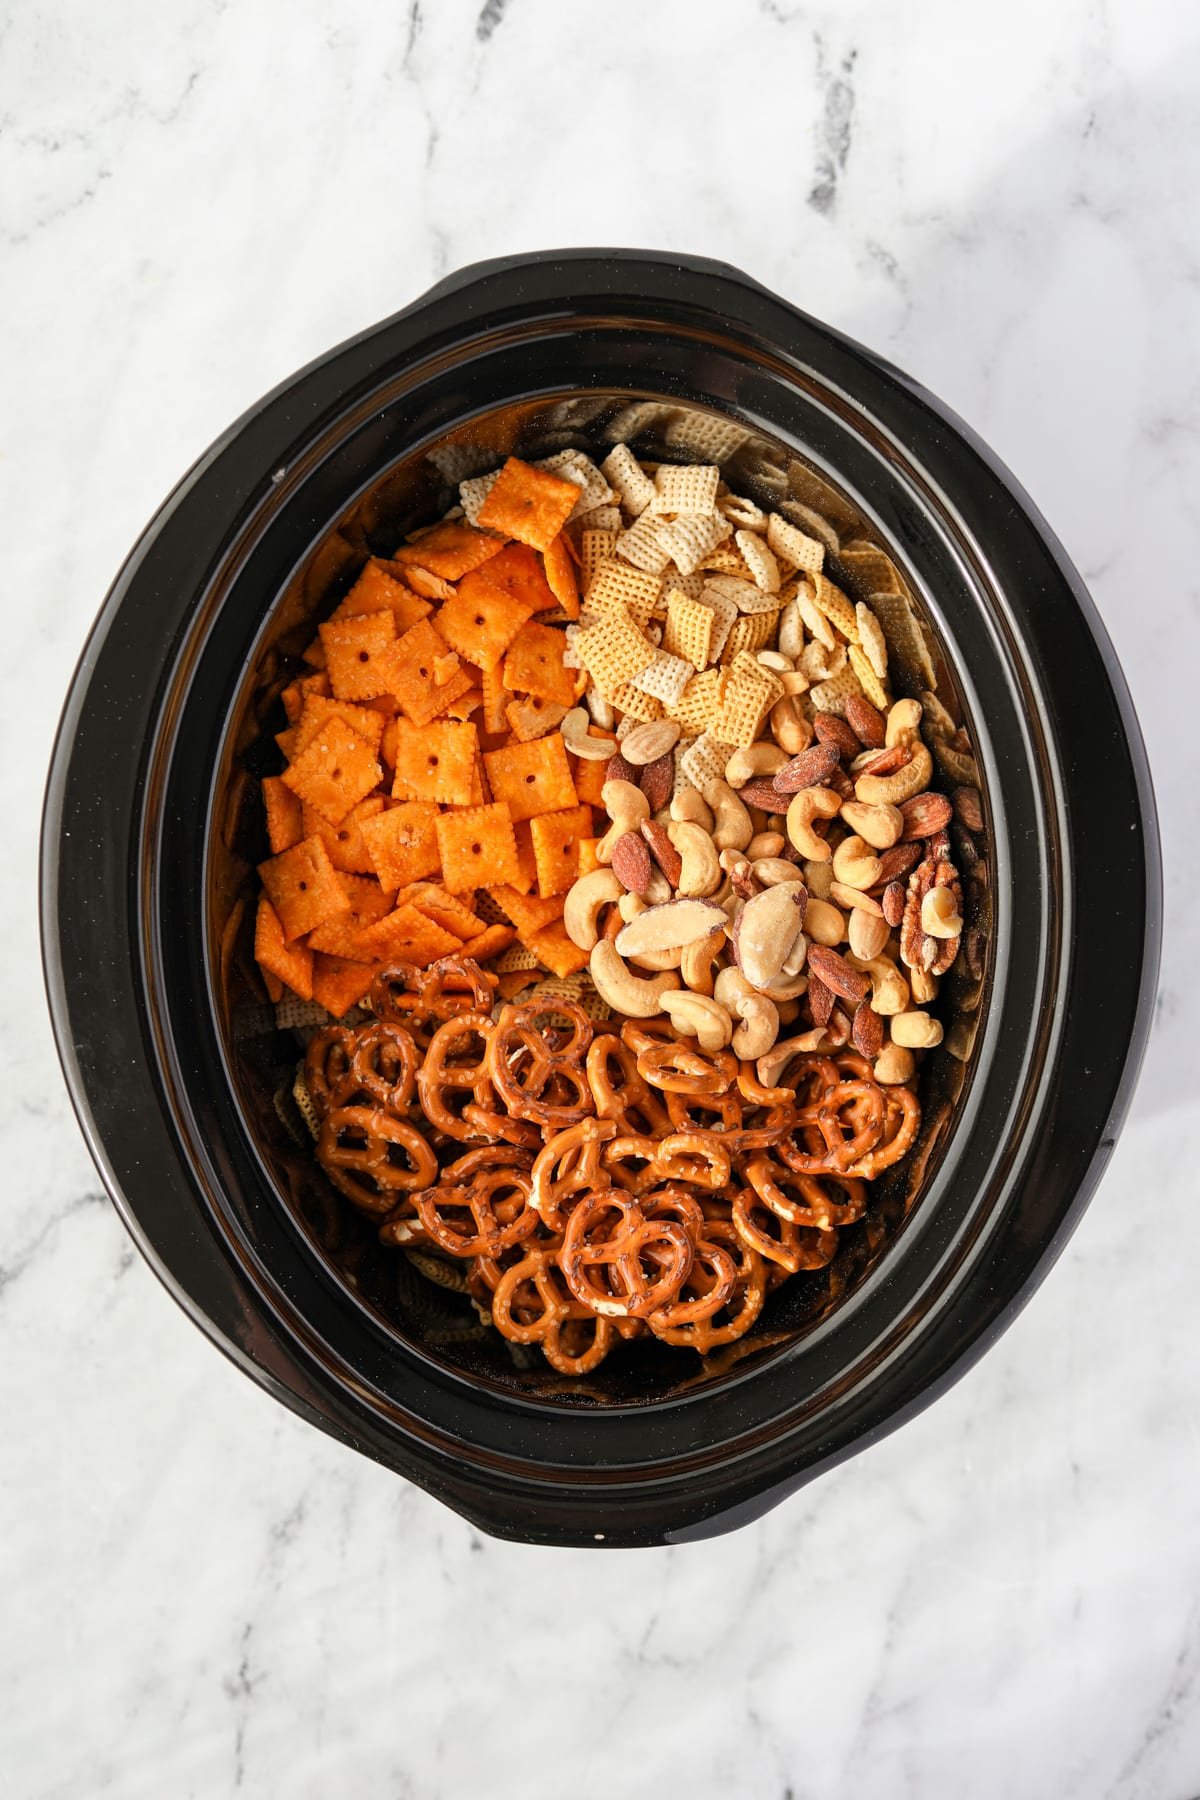 A slow cooker with chex cereal, crackers, pretzels, and mixed nuts inside/